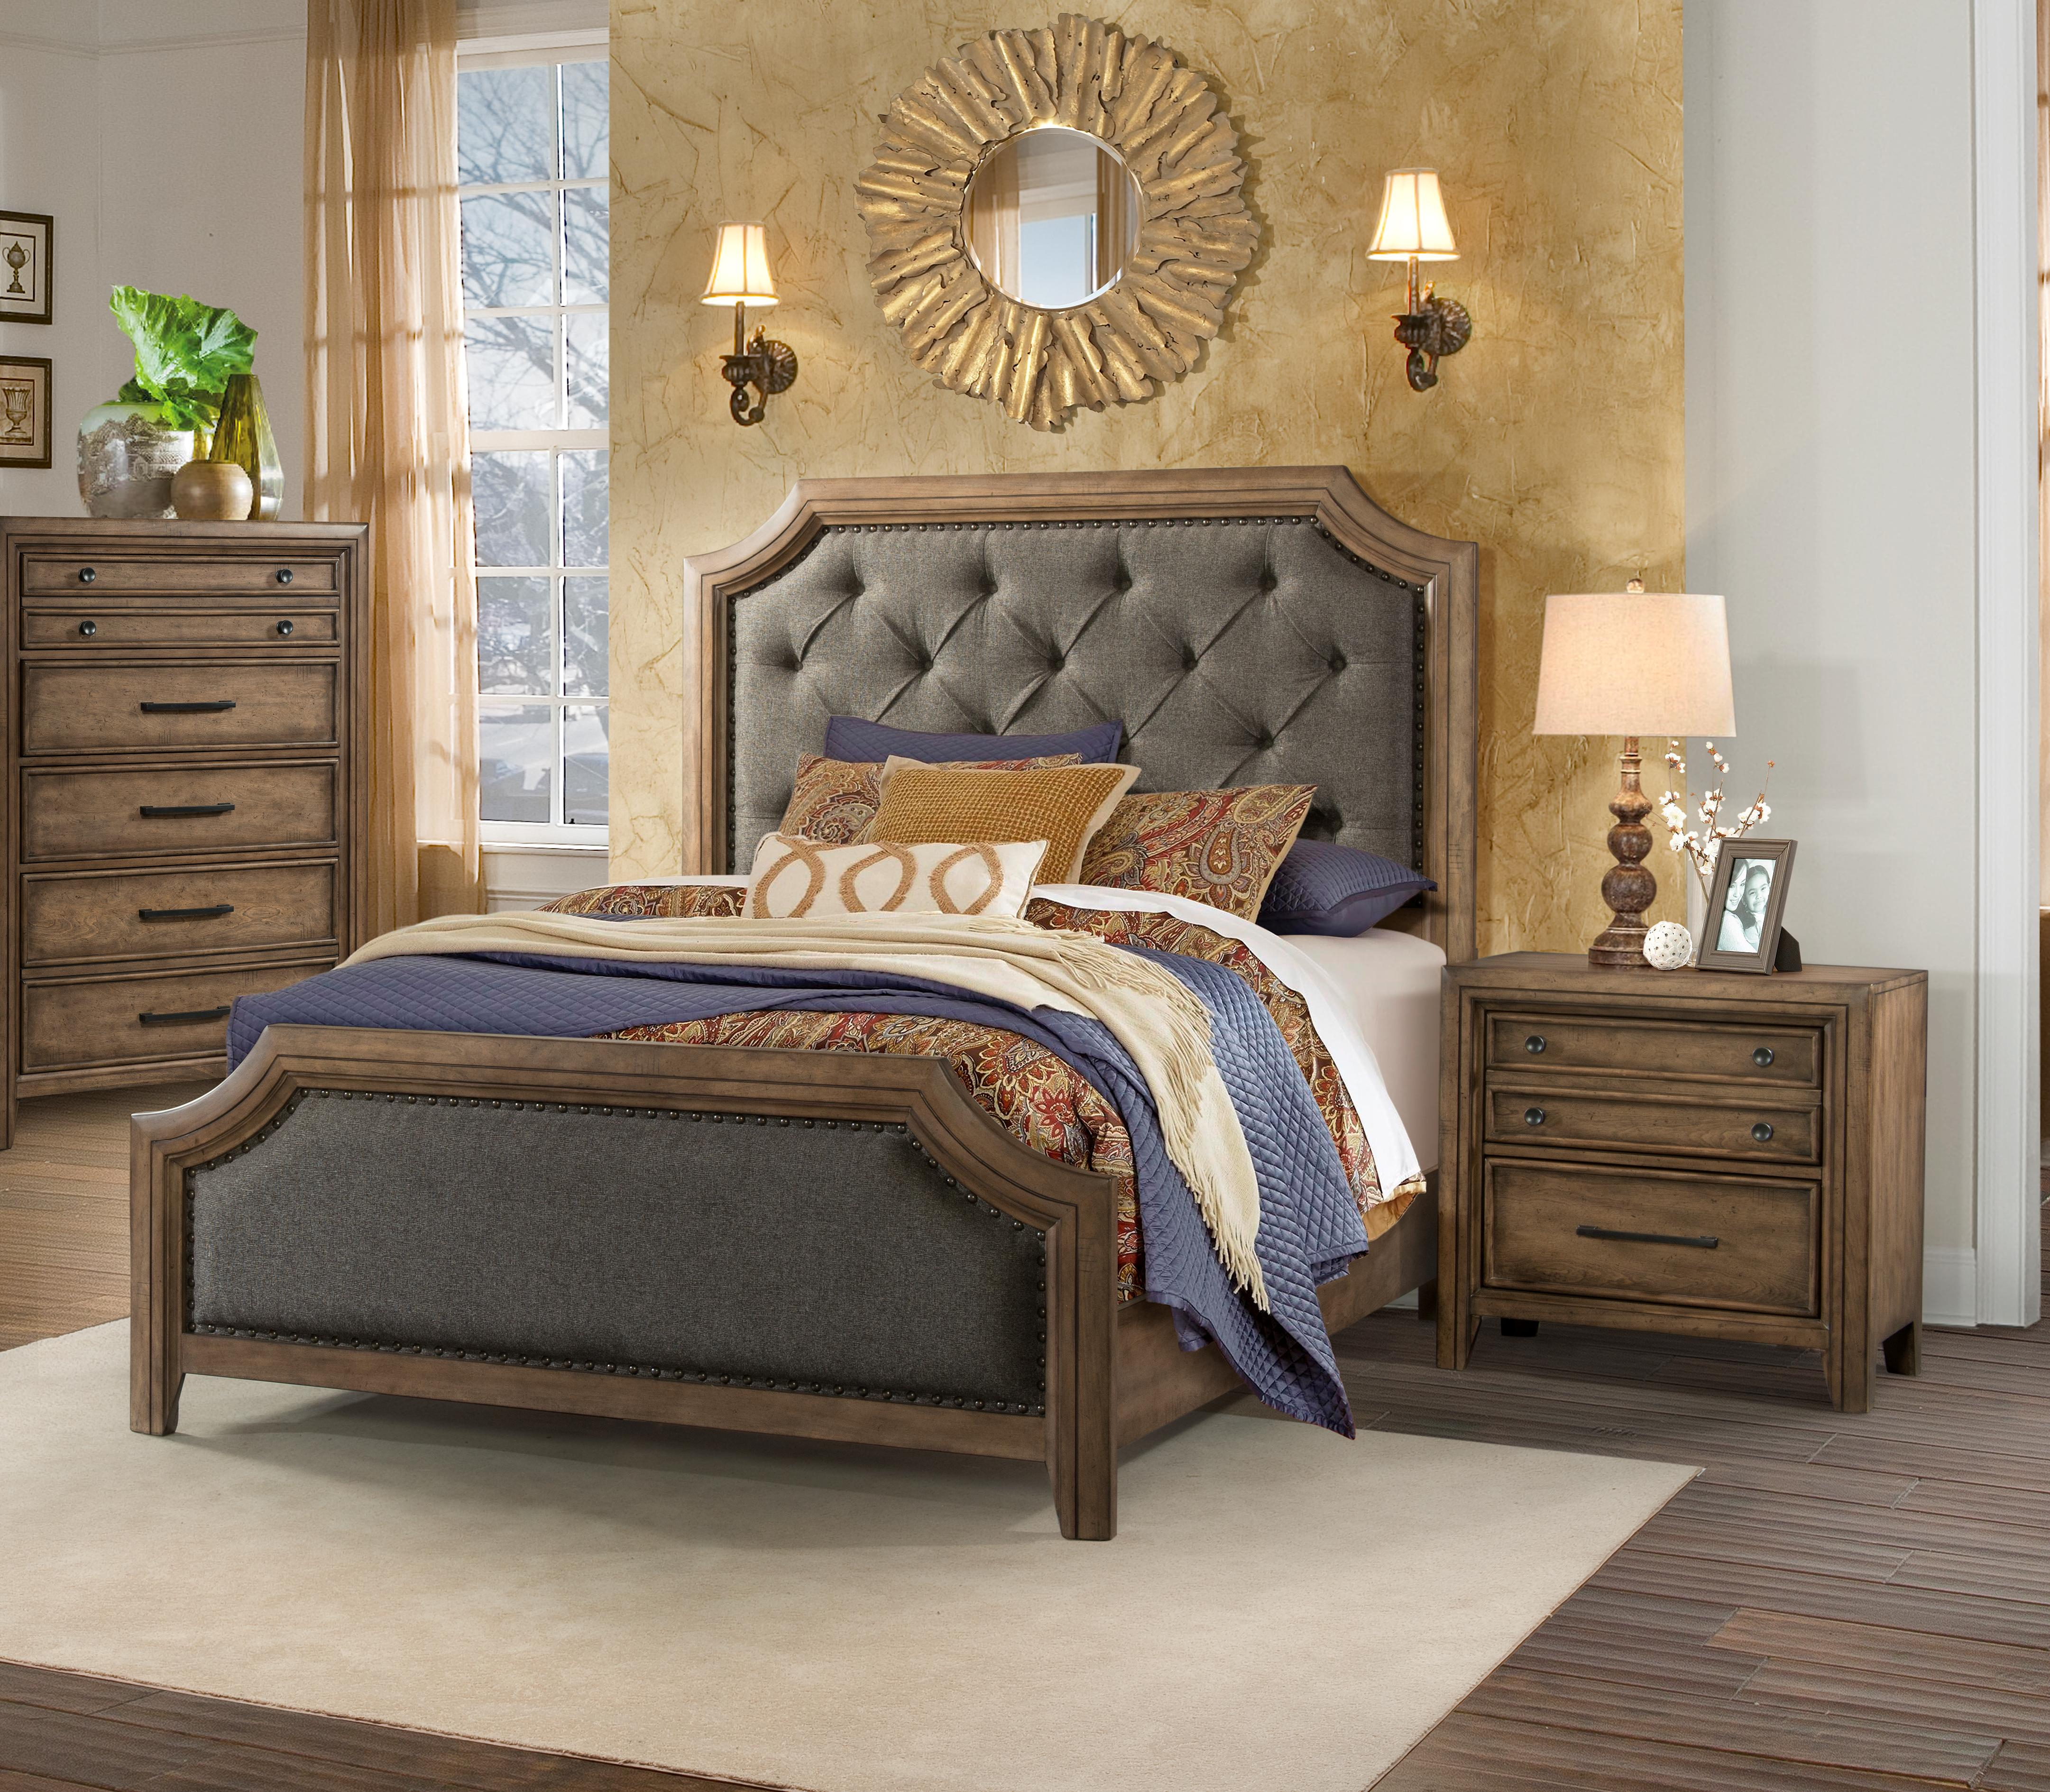 Lane Furniture Urban Charm Smoked 2pc Bedroom Set With Queen Bed regarding size 4323 X 3779